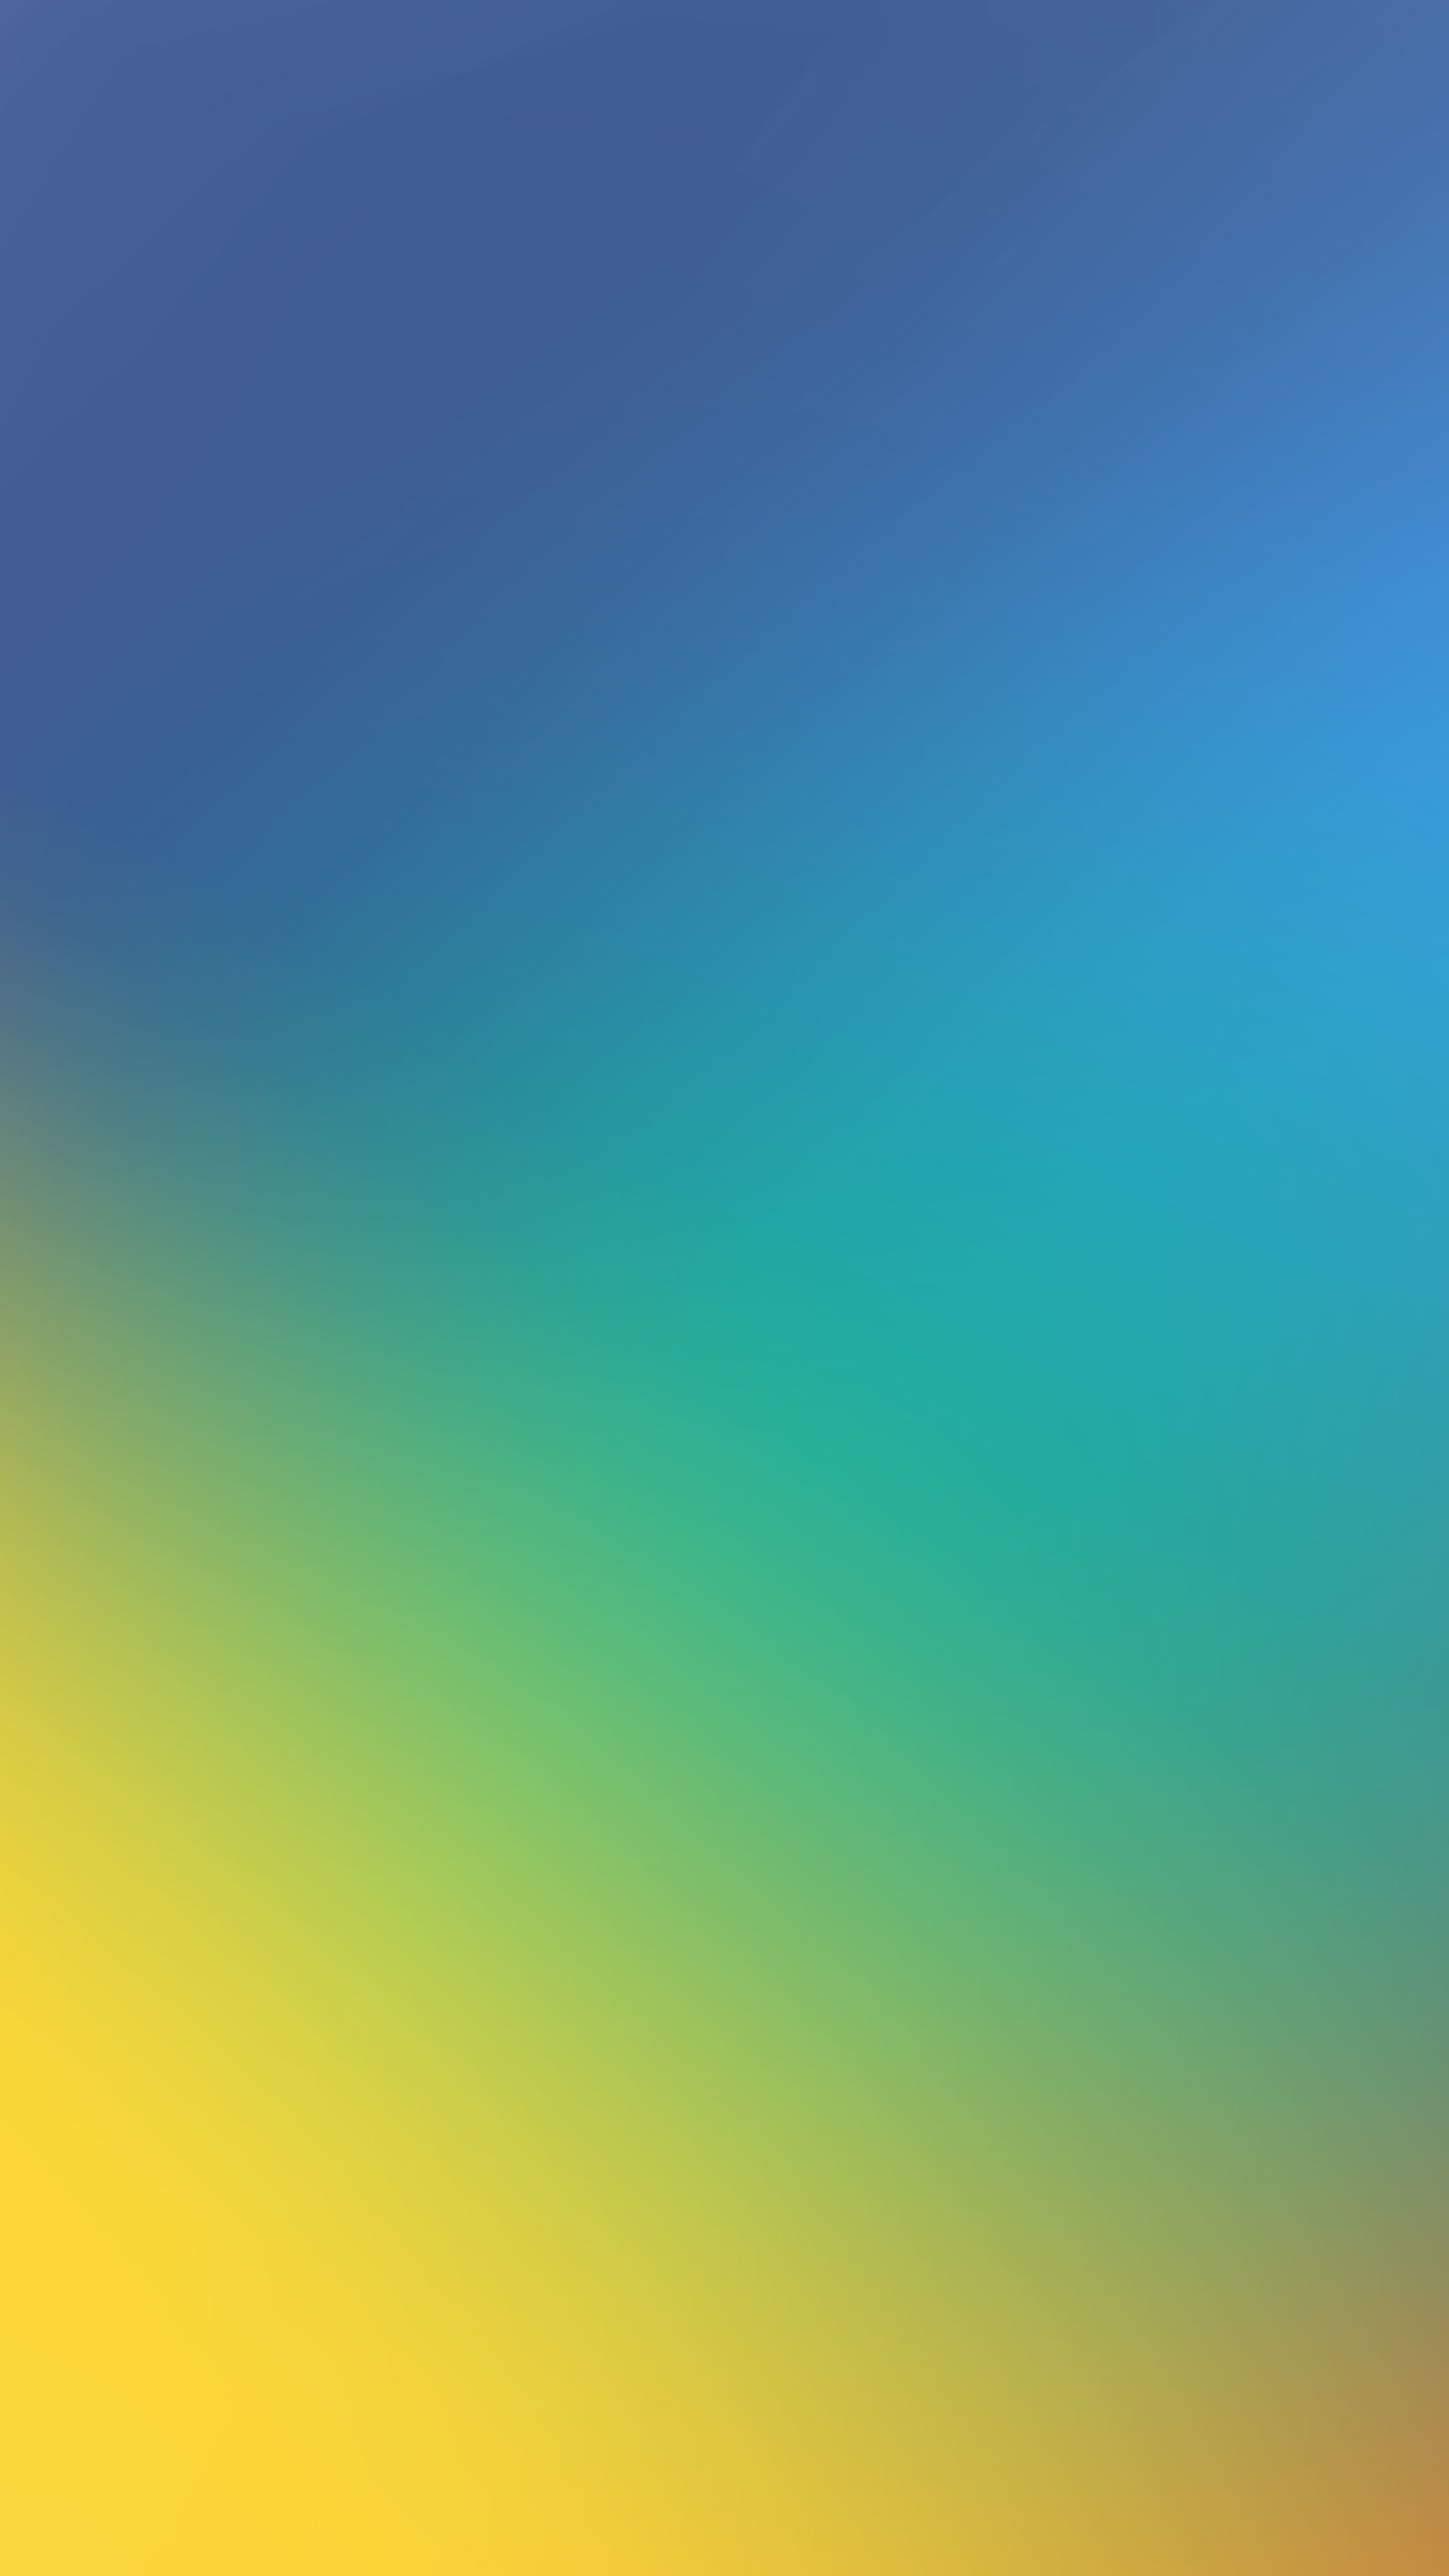 Download 2160x3840 Wallpaper Blue Yellow Gradient Abstract 4k Sony Xperia Z5 Premium Dual 2160x3840 Hd Image Background 1530